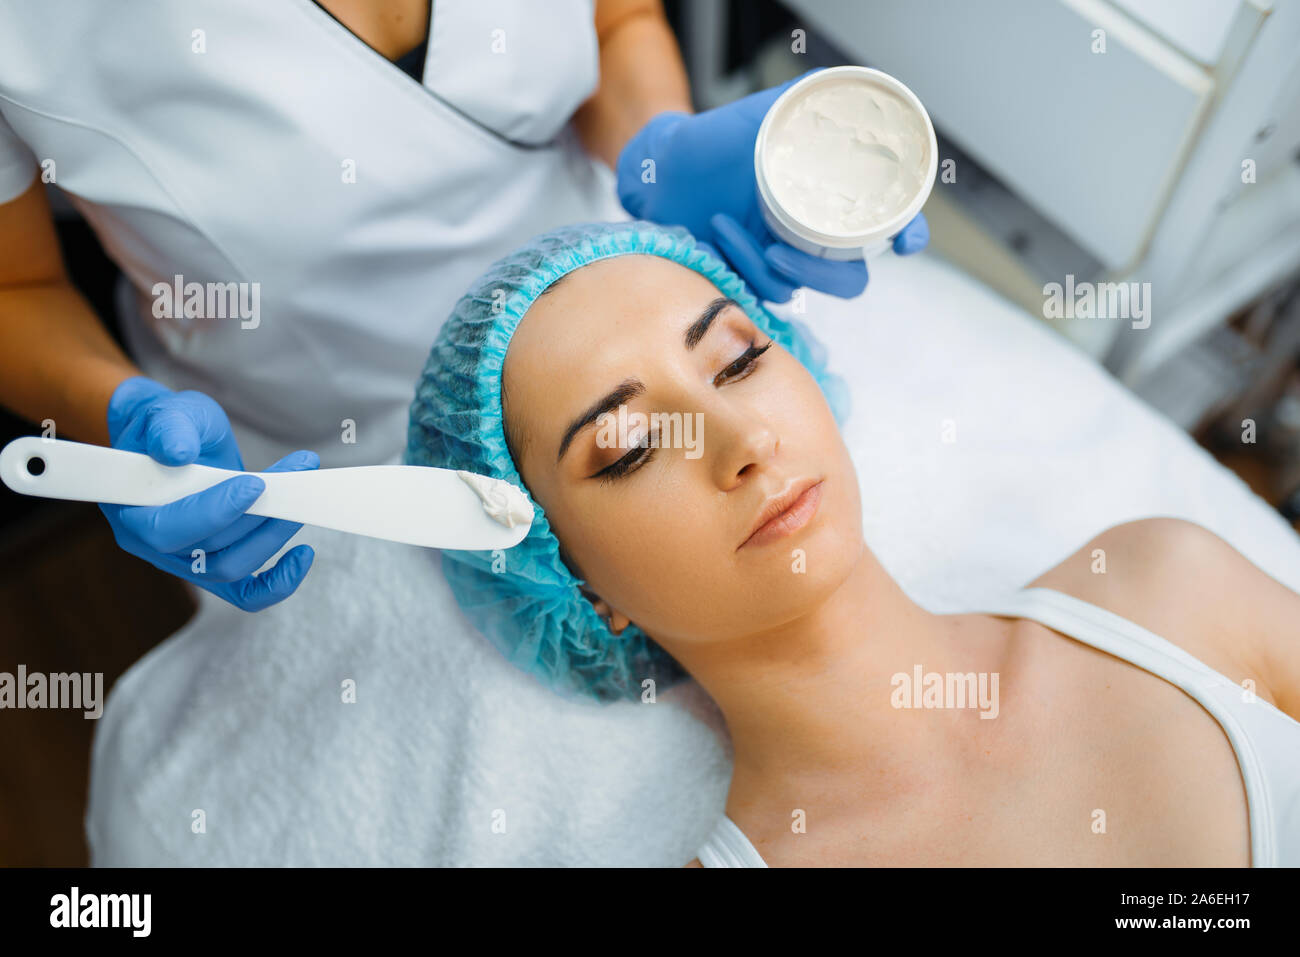 Cosmetician applies the cream to patient's face Stock Photo